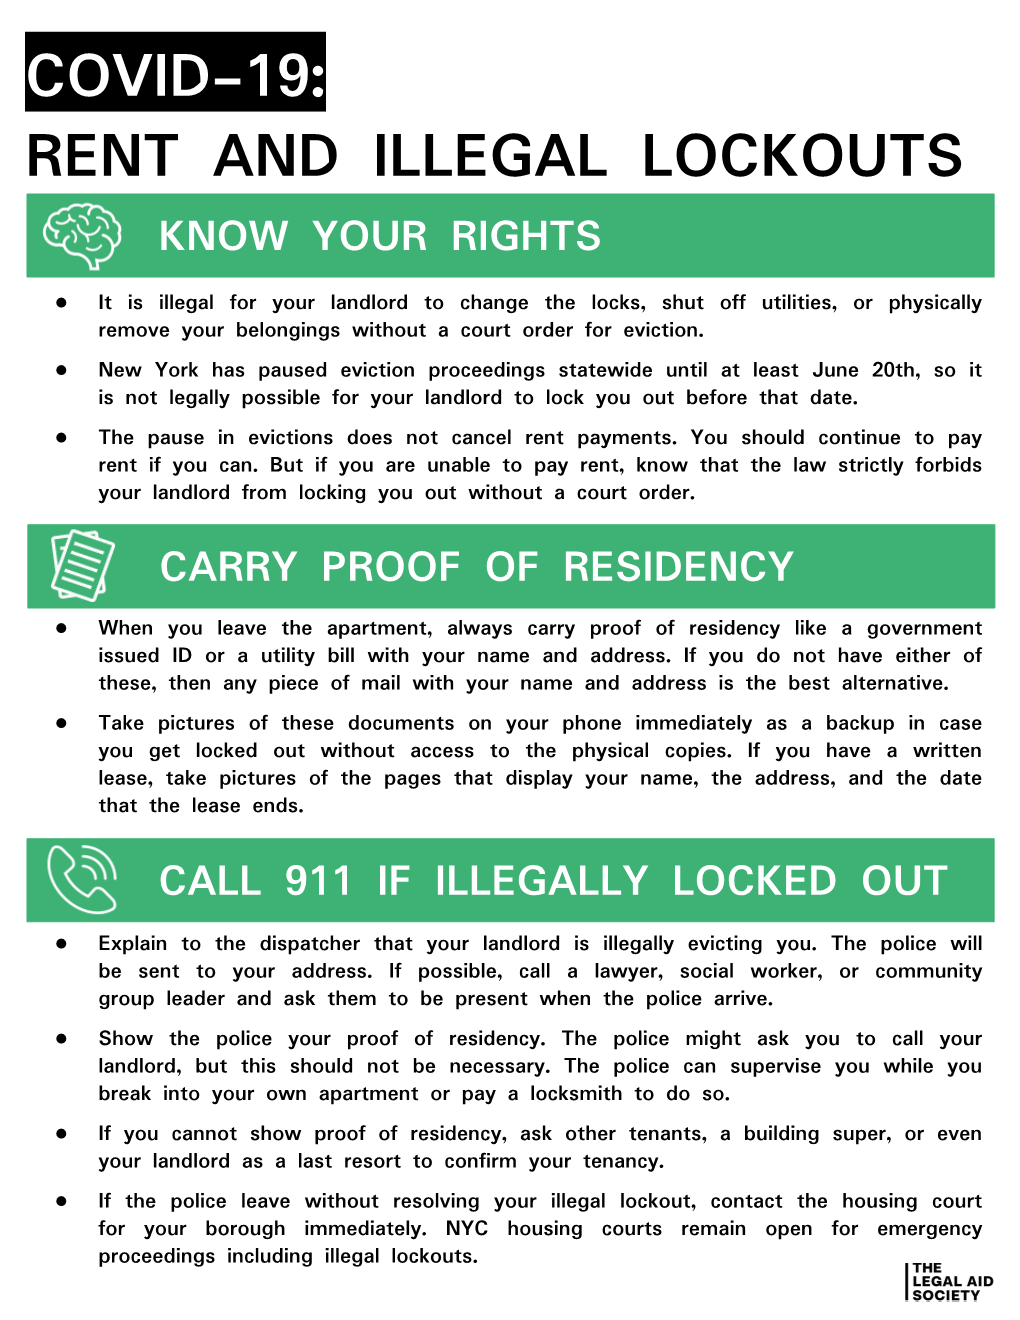 Covid-19: Rent and Illegal Lockouts Know Your Rights